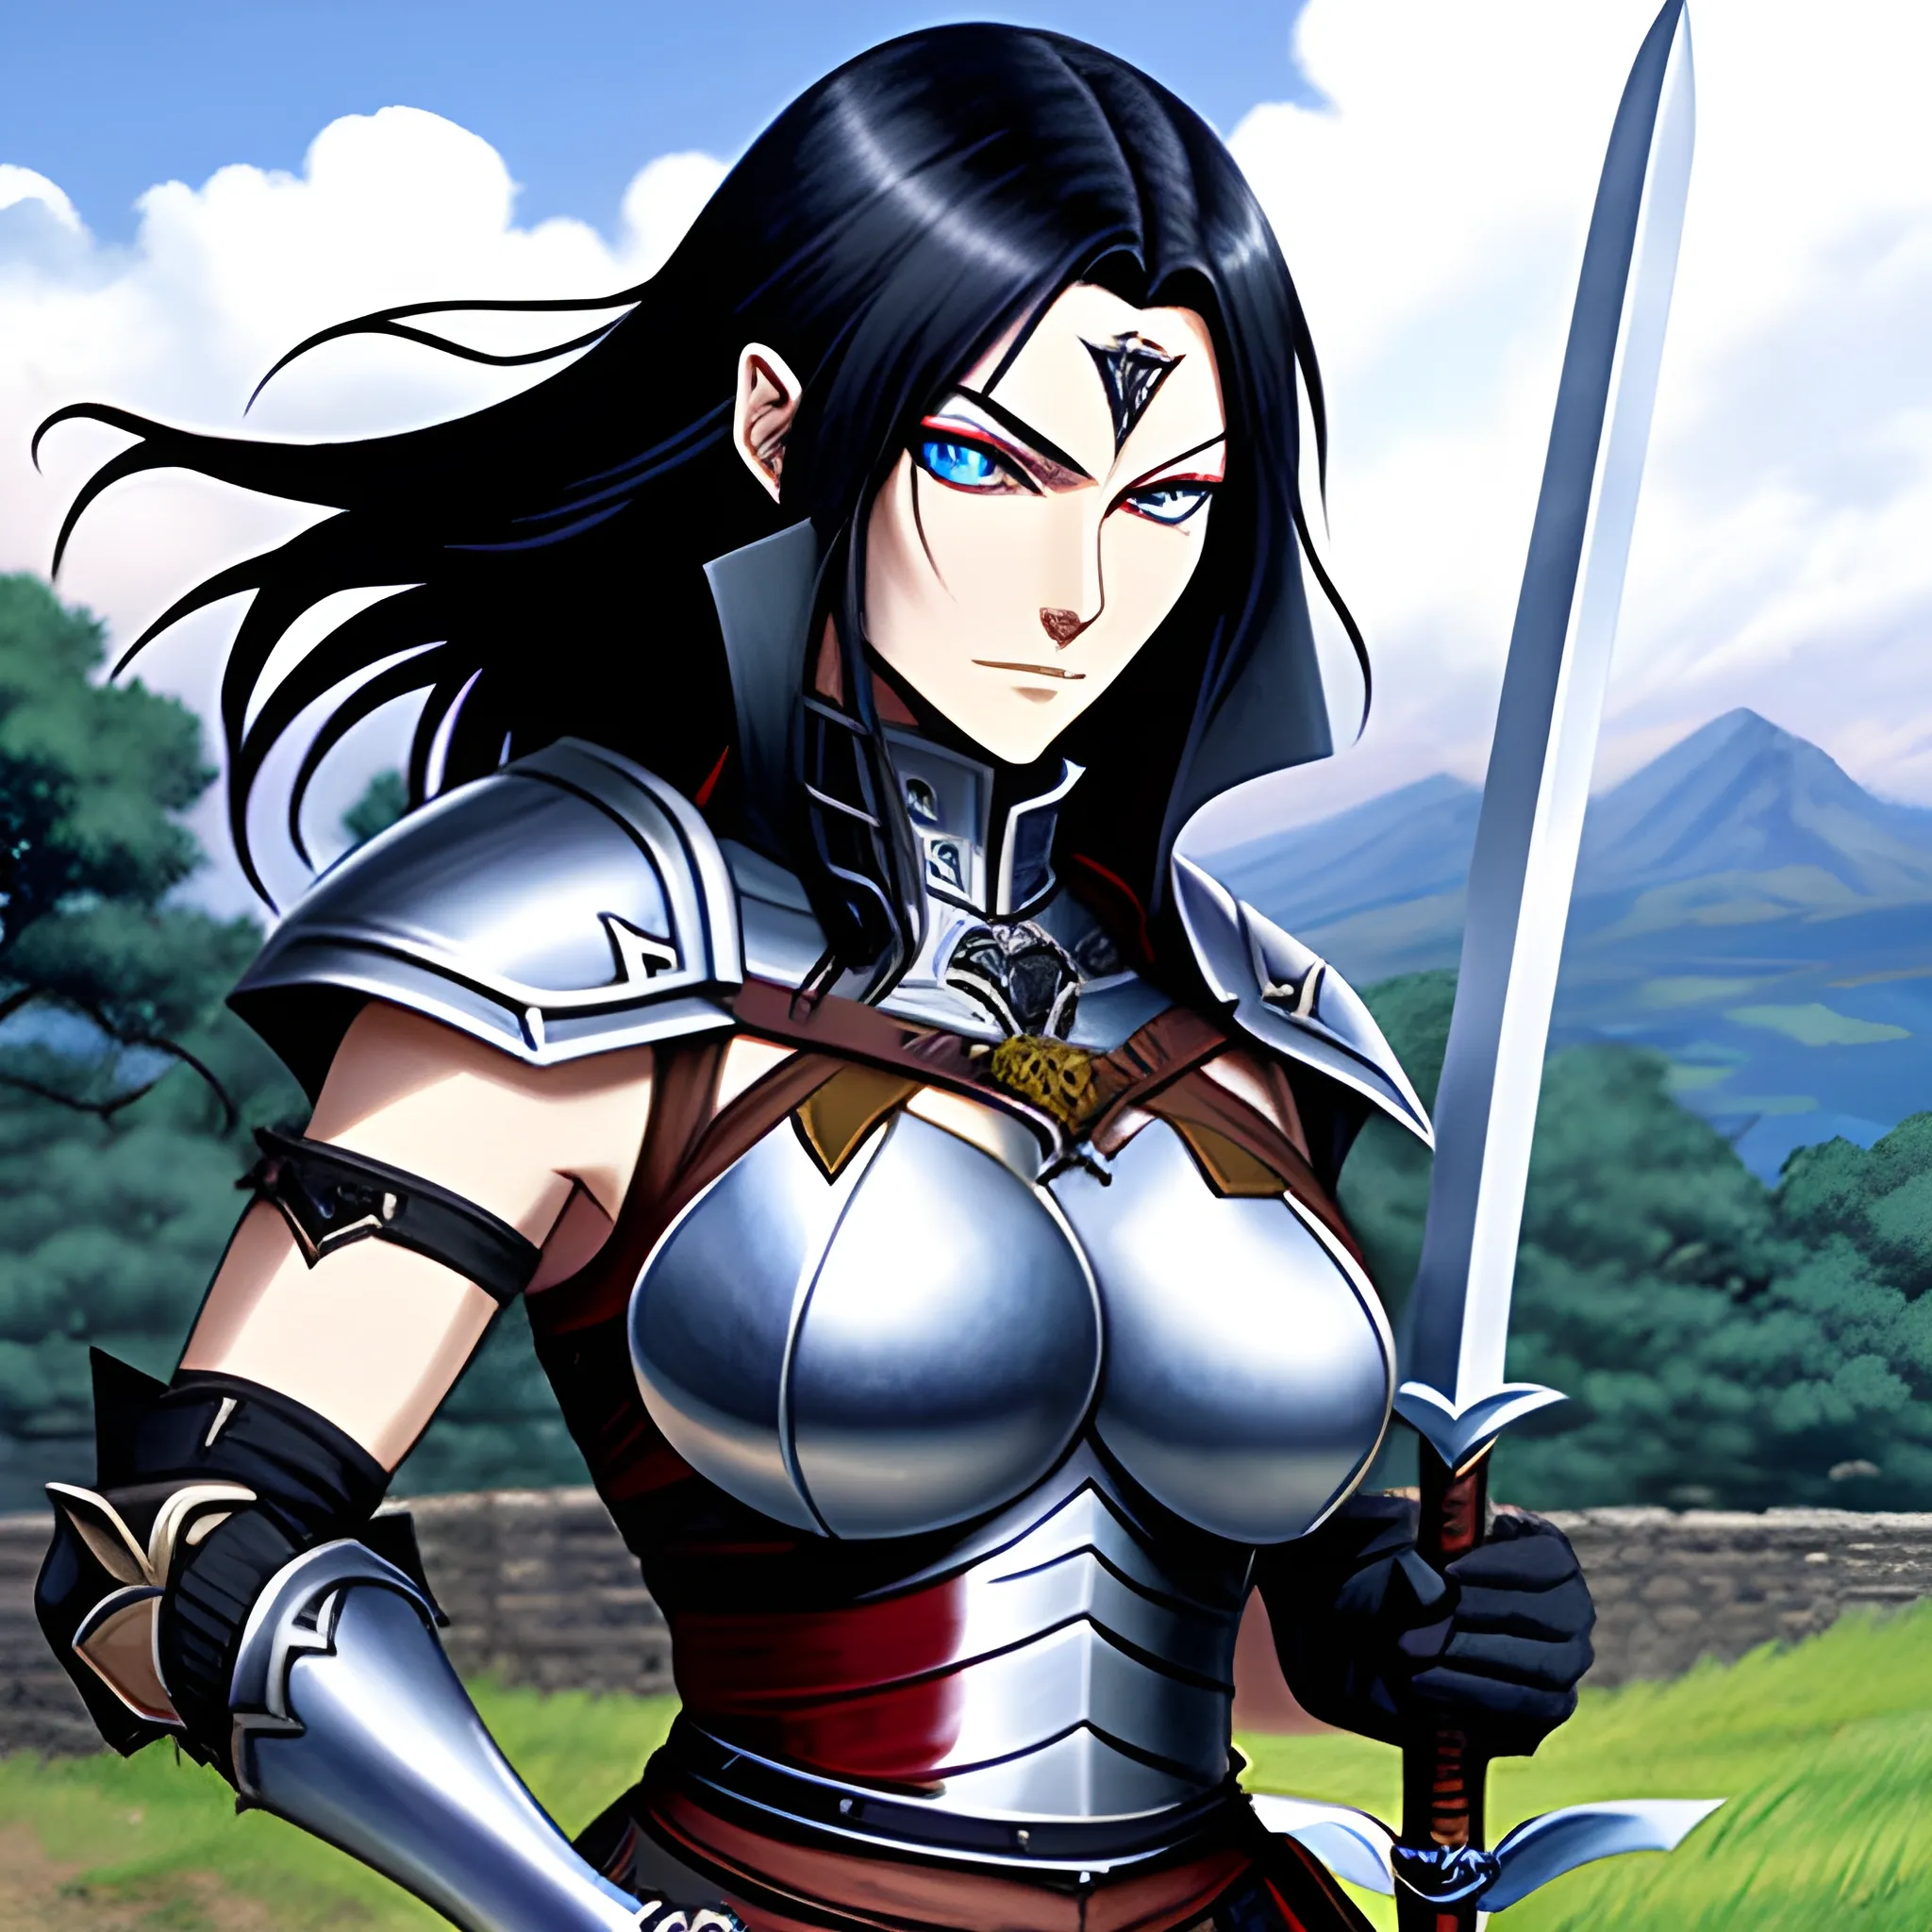 Warrior Anime Girl Wallpapers | HD Wallpapers | ID #26151